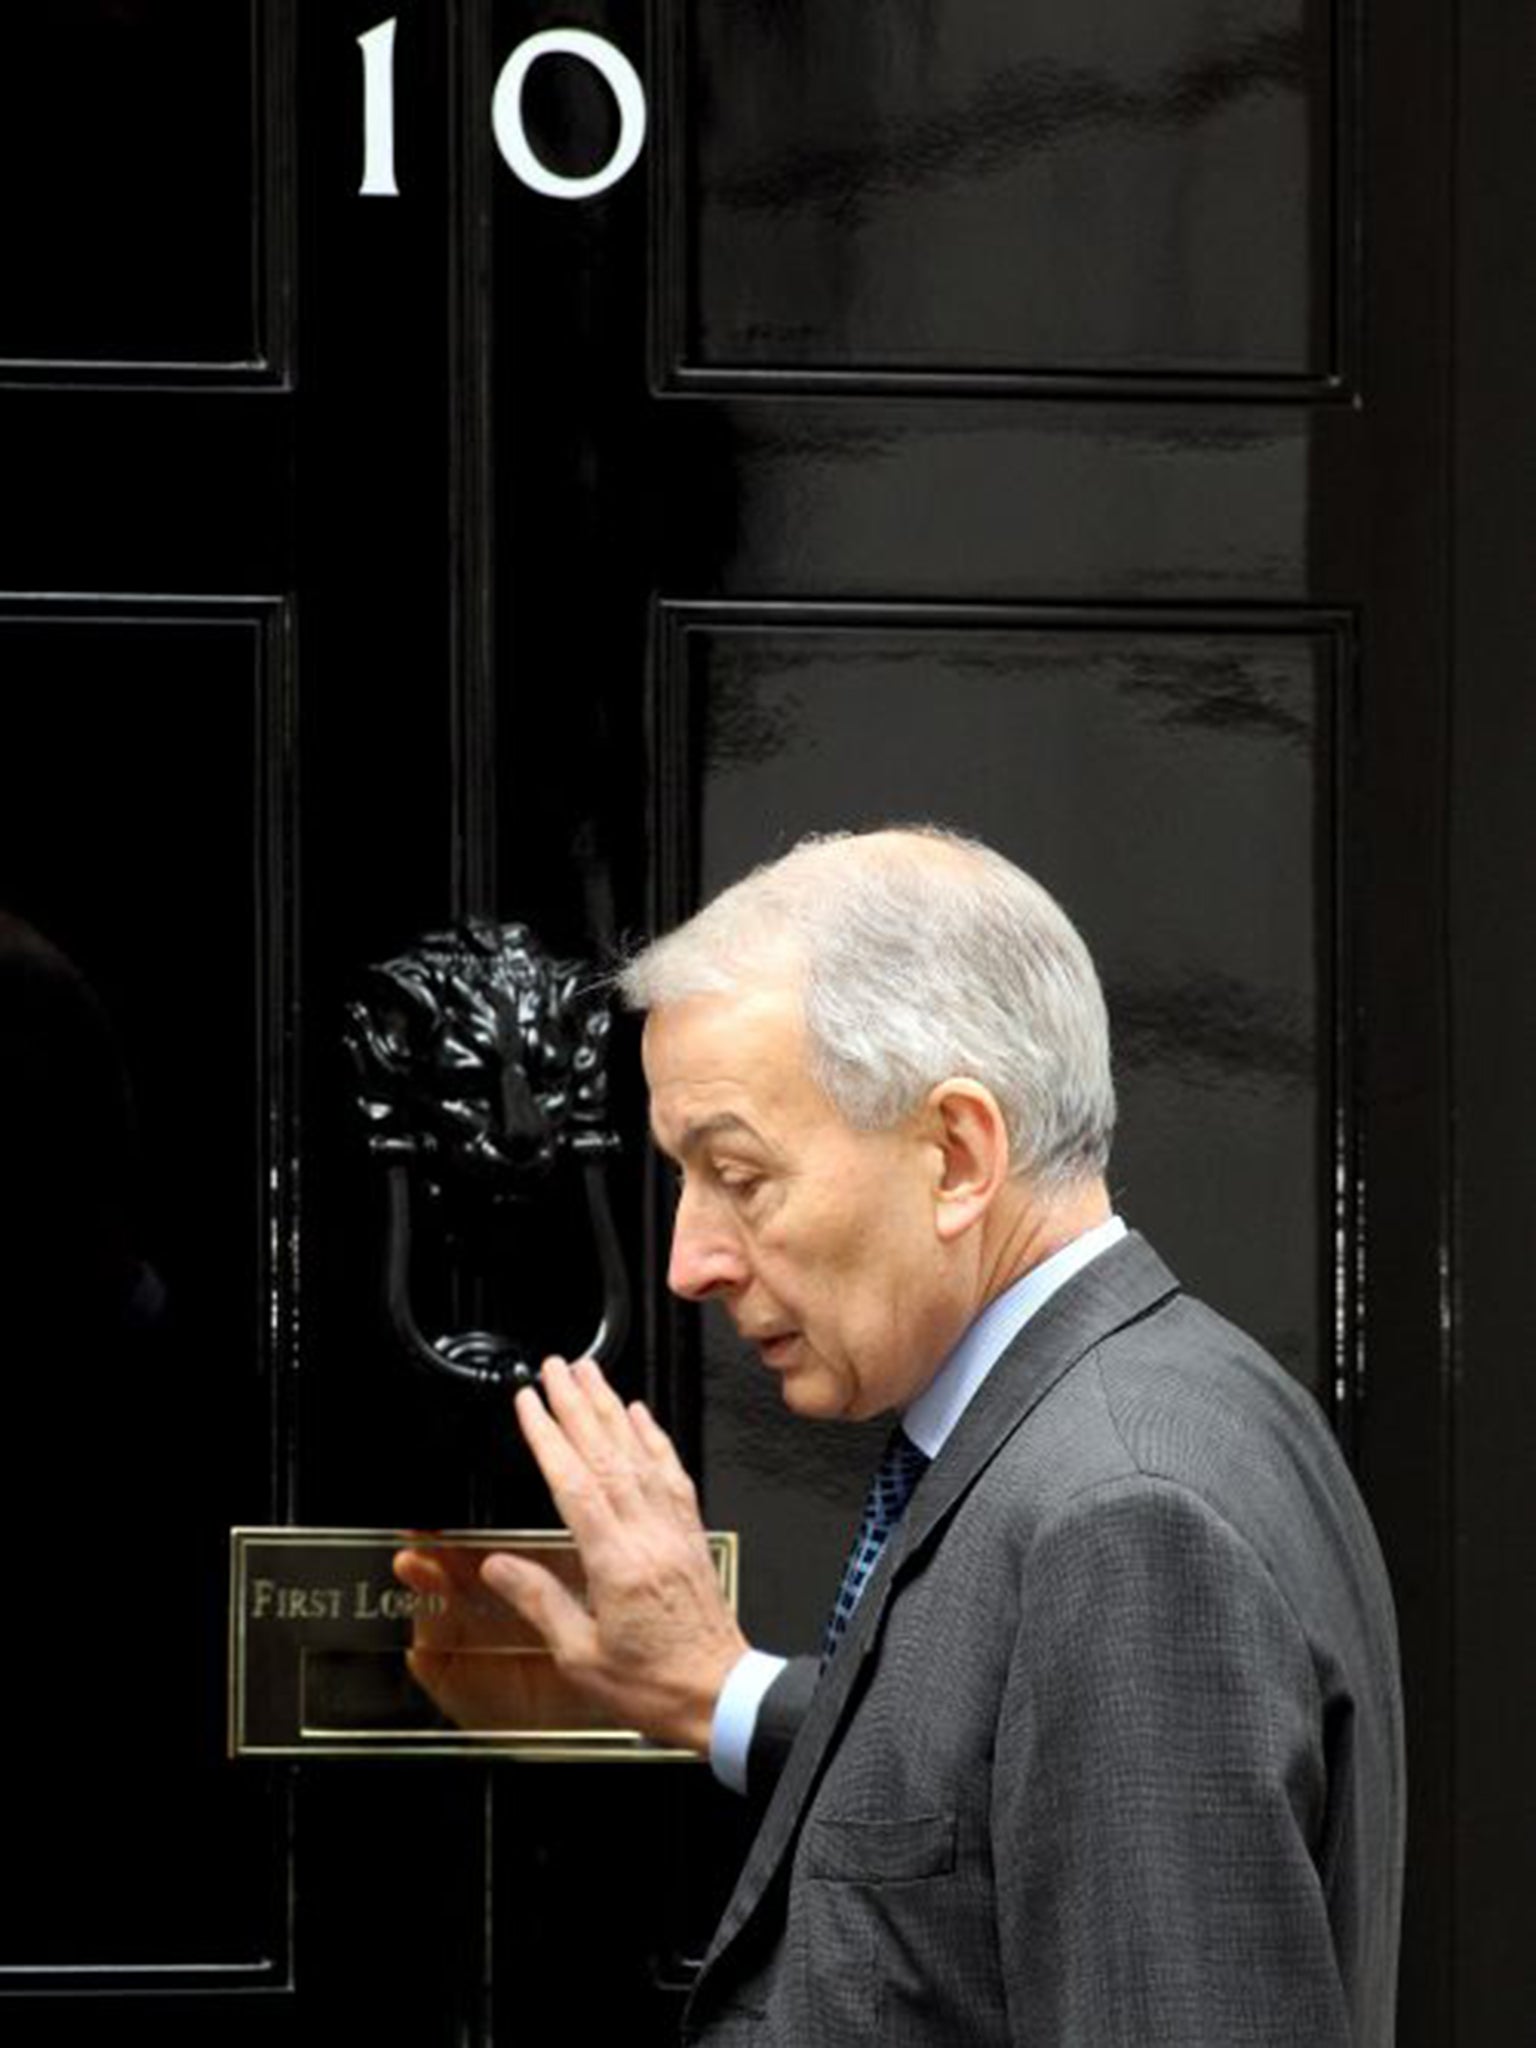 Delivery company Hermes savaged by Frank Field over workers